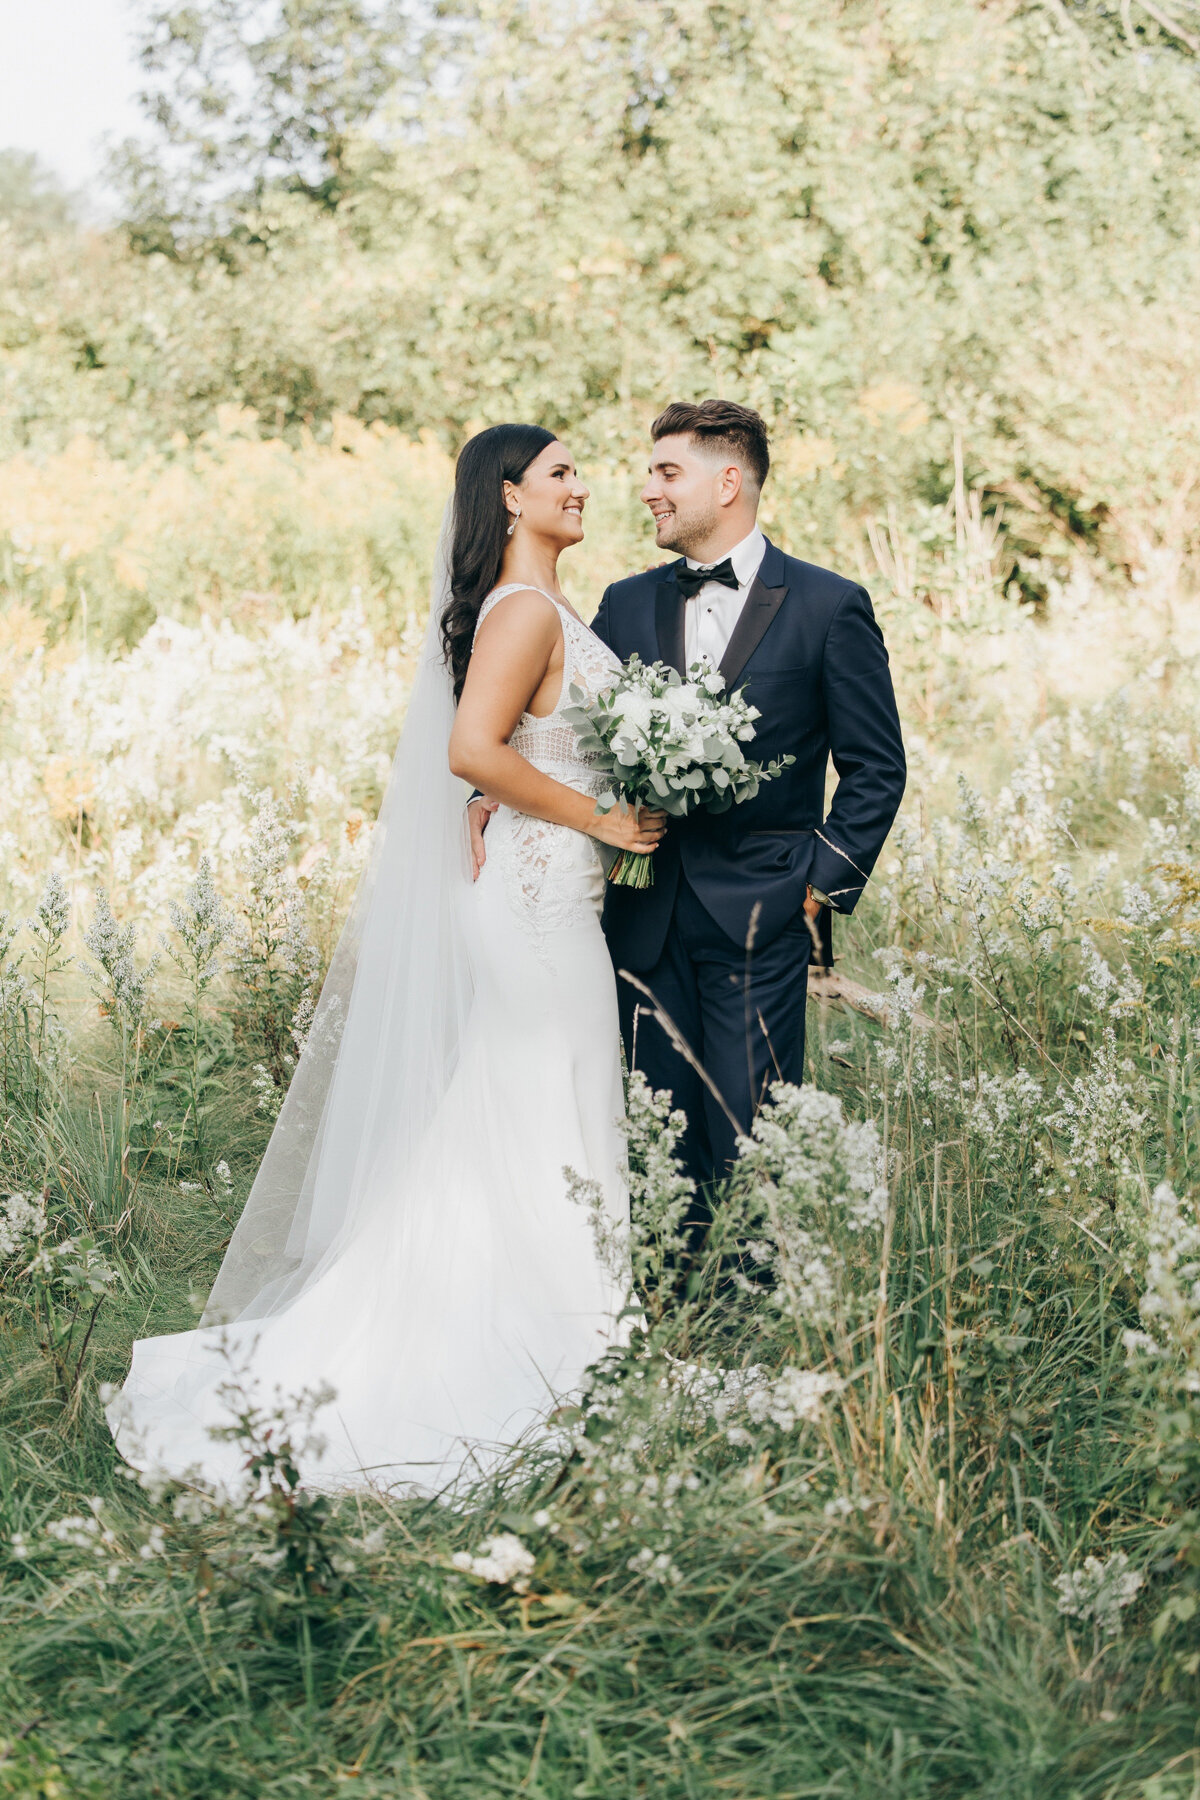 A bride and groom posing in a field